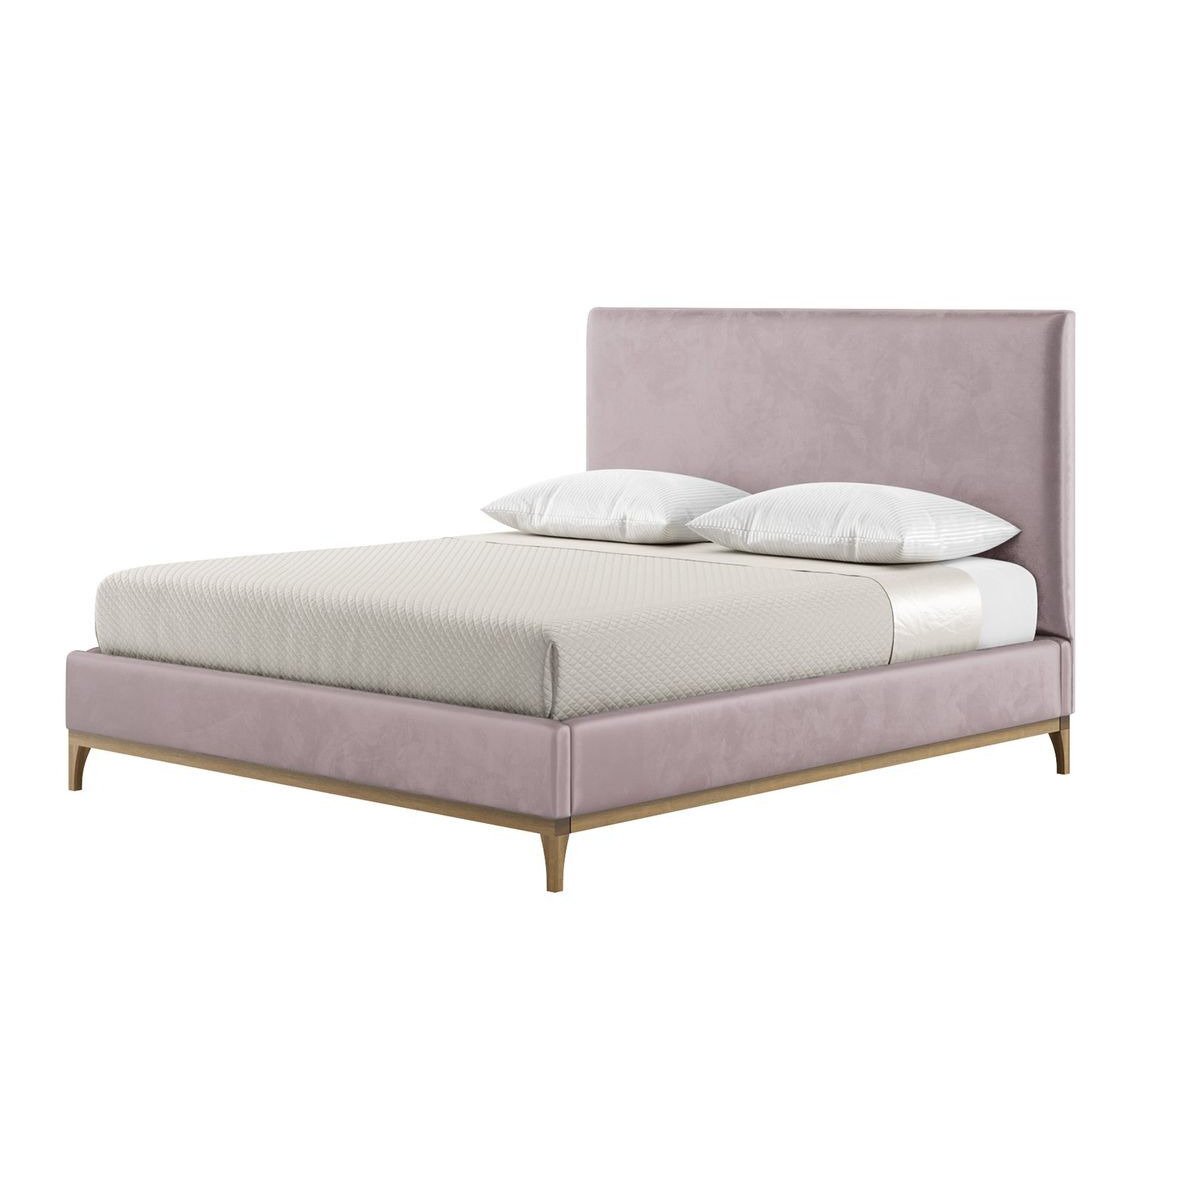 Diane 6ft Super King Size Bed Frame with modern smooth headboard, lilac, Leg colour: wax black - image 1